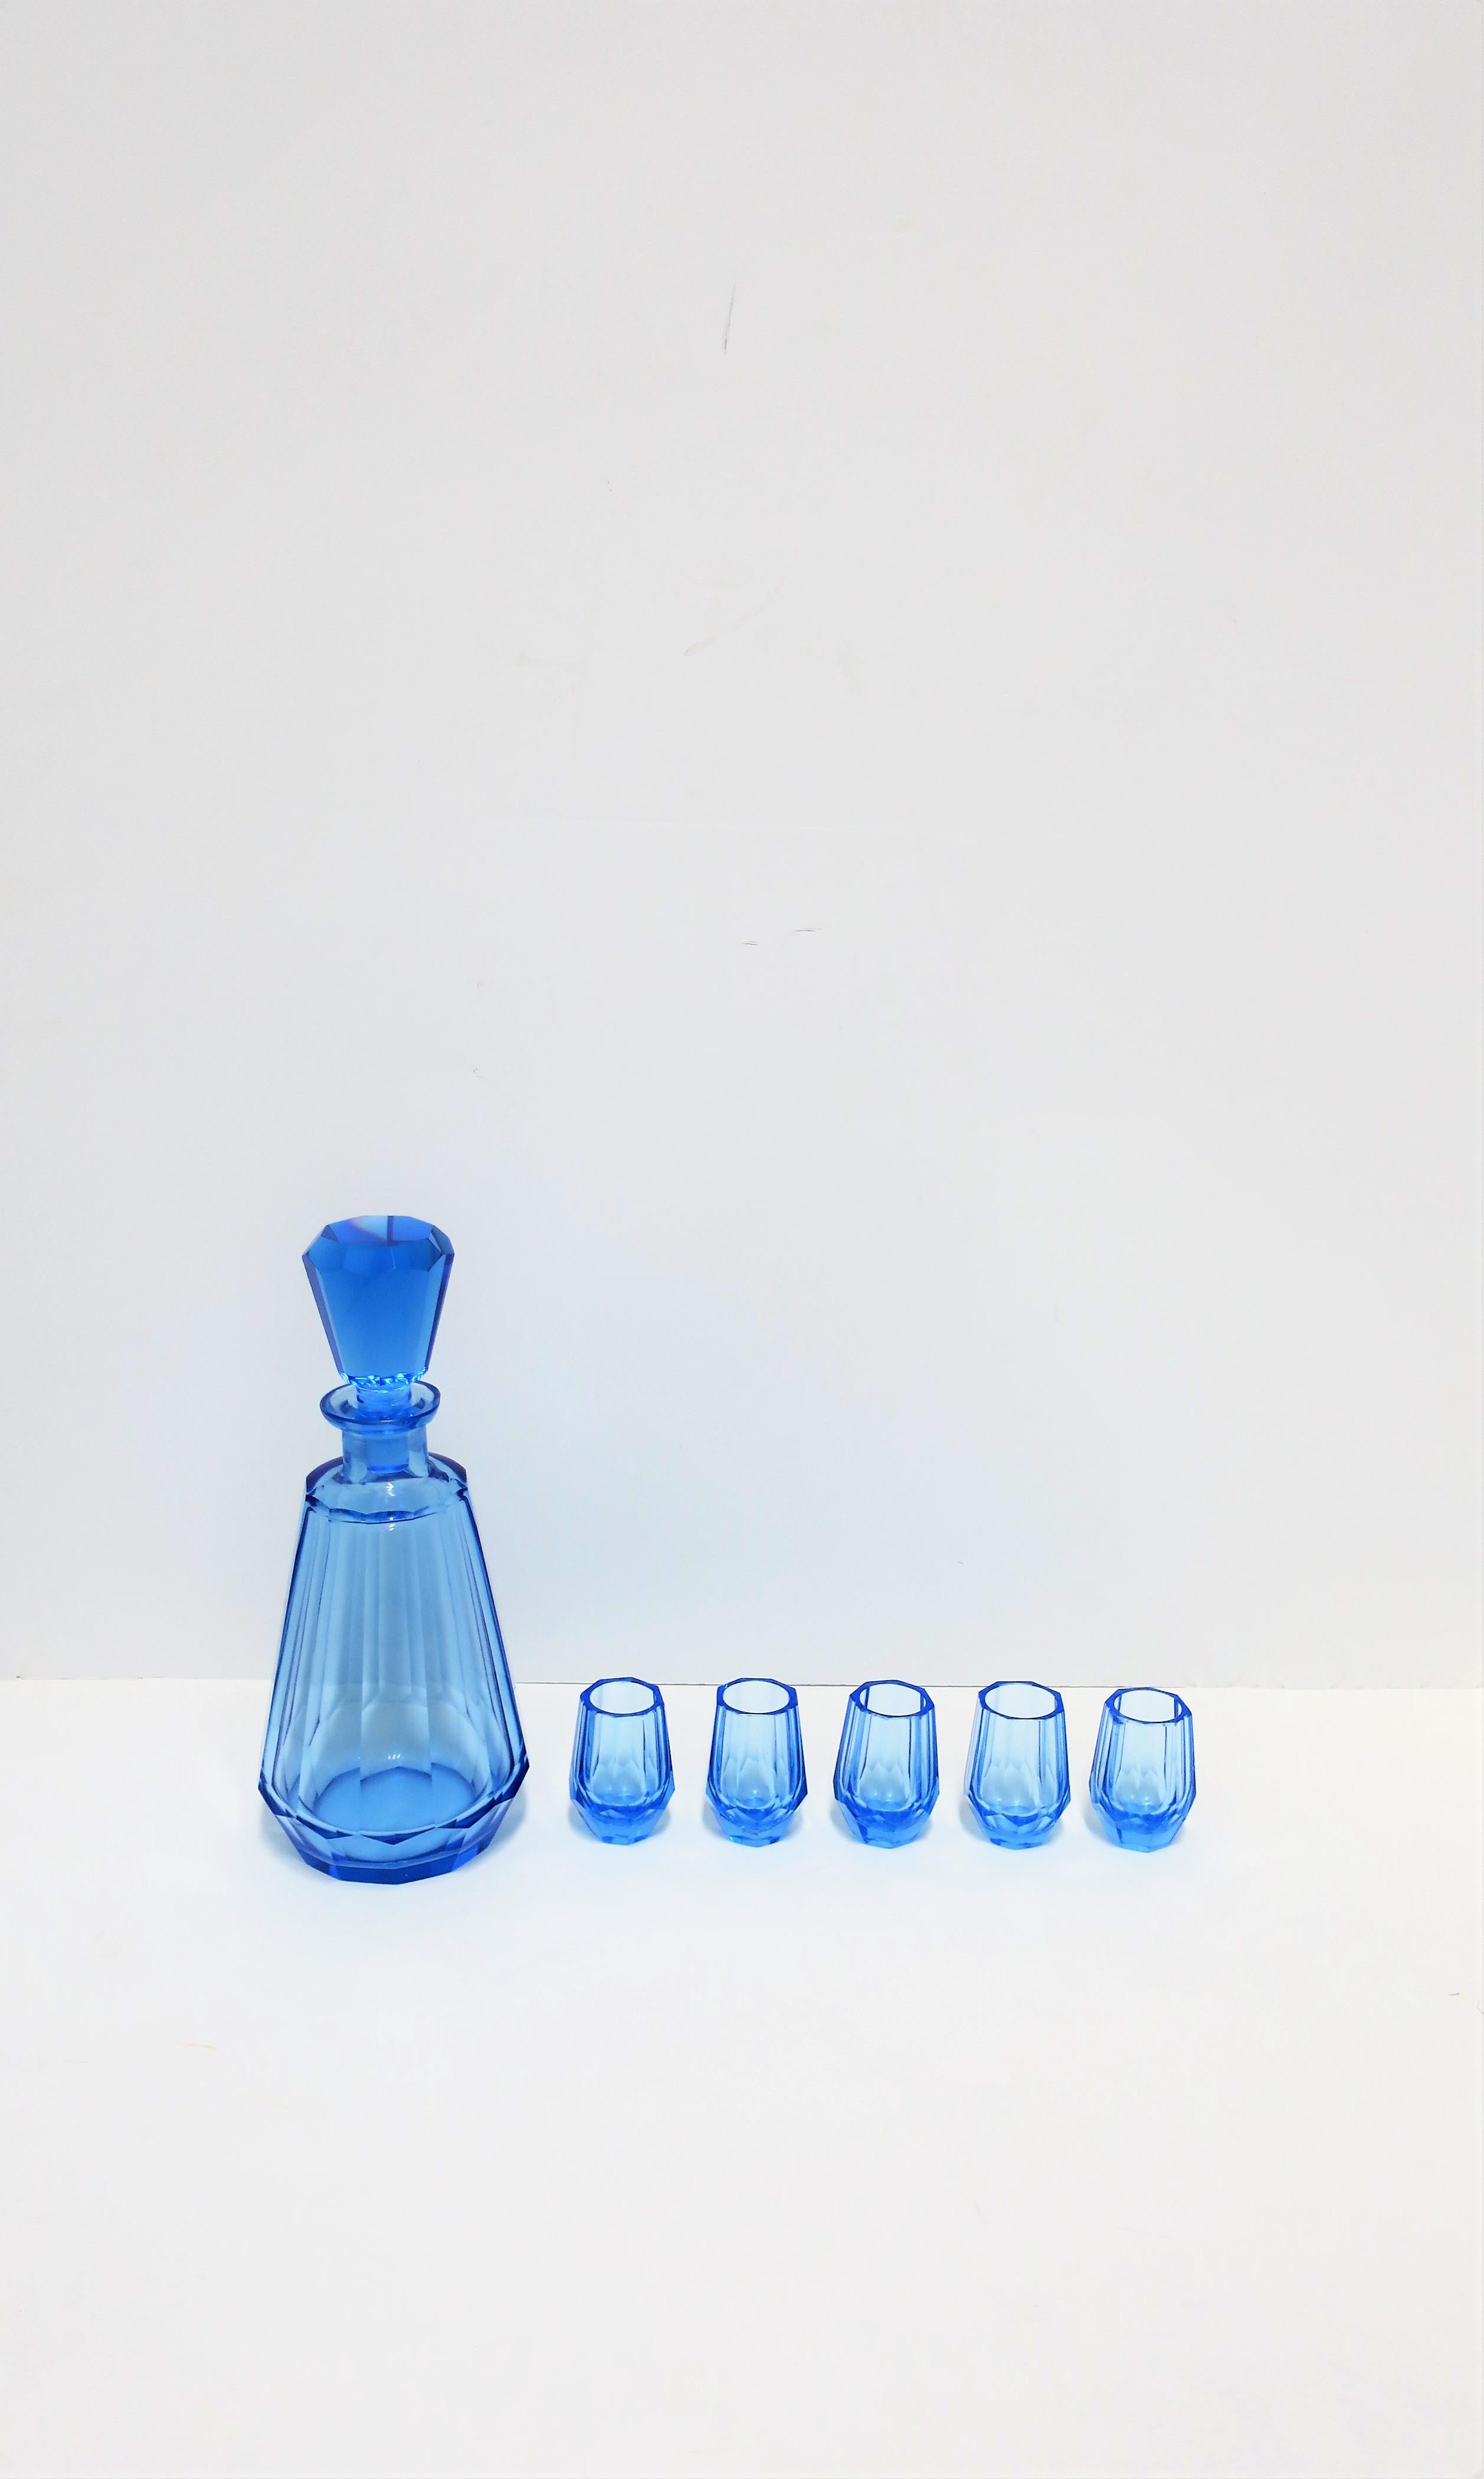 A beautiful European blue crystal liquor or spirits decanter and shot glass set, circa mid-20th century, Europe. Set is attributed to luxury crystal maker Moser. Set includes one decanter and 5 glasses. Decanter top and glasses have a beautiful